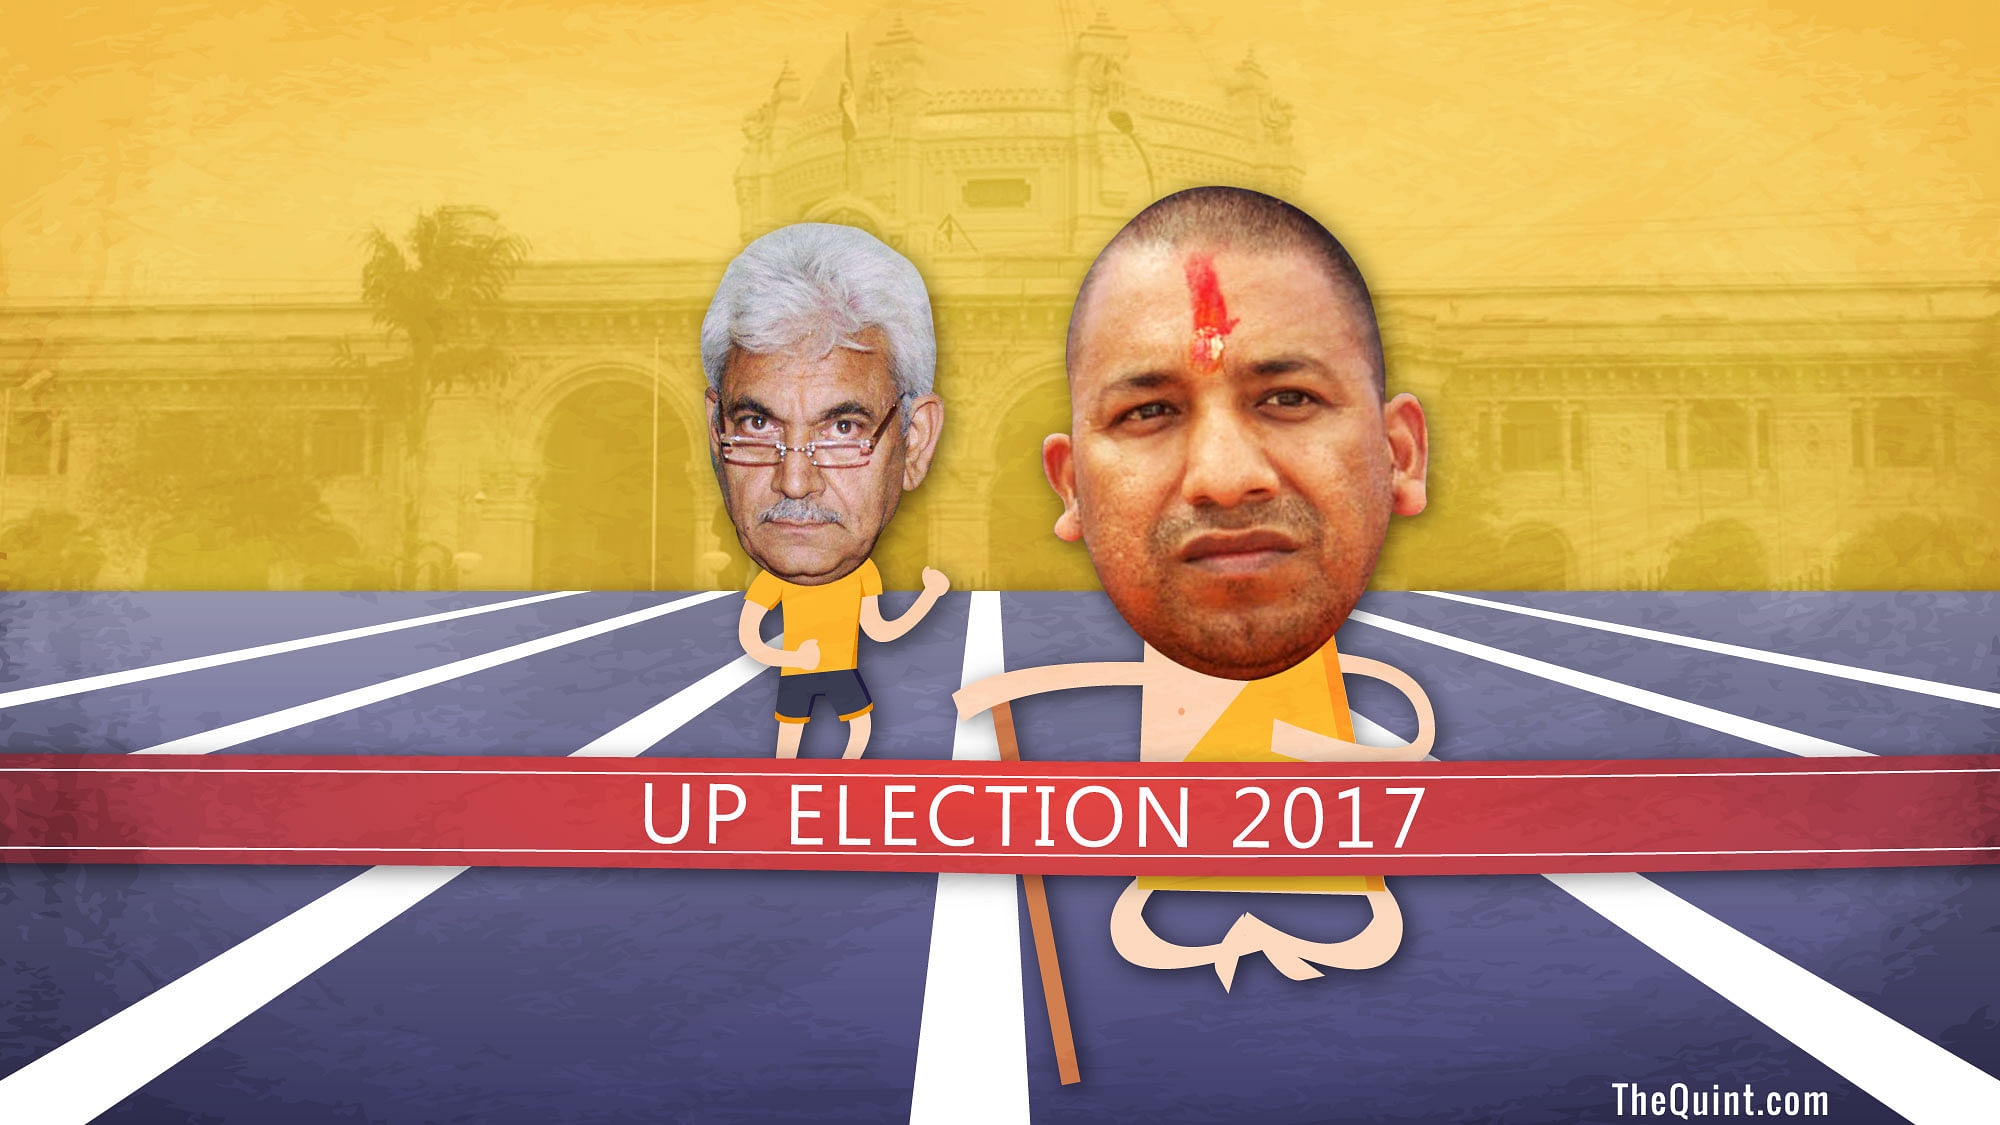 Manoj Sinha would’ve been the Centre’s dummy while Yogi Adityanath can lead to Hindu consolidation ahead of 2019 polls. (Photo: Harsh Sahani/ <b>The Quint</b>)